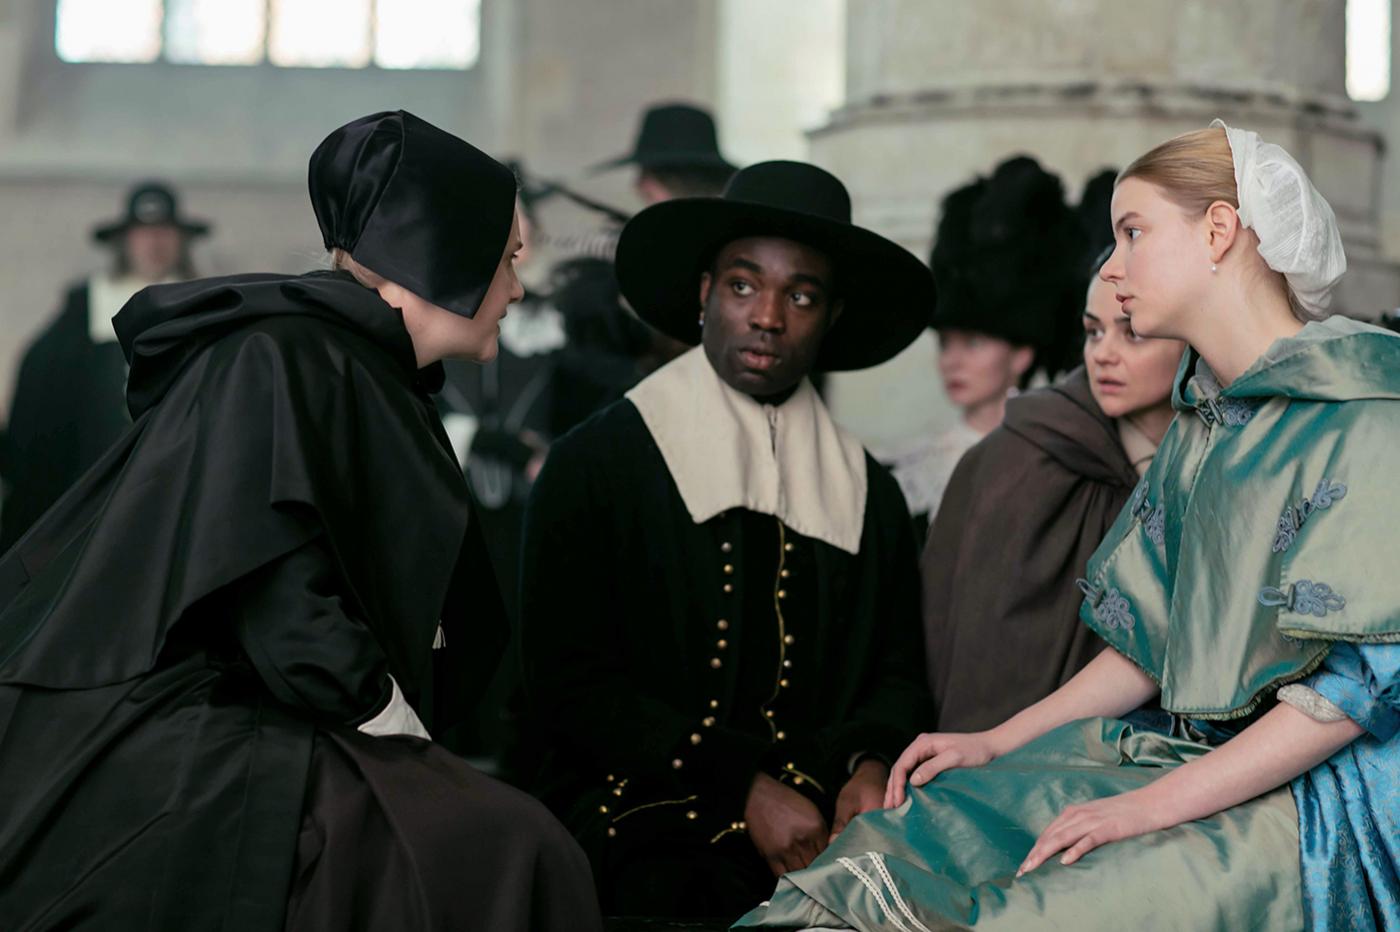 Romola Garai as Marin, Paapa Essiedu as Otto, Hayley Squires as Cornelia and Anya Taylor-Joy as Nella in The Miniaturist. Photo: The Forge/Laurence Cendrowicz for BBC and MASTERPIECE